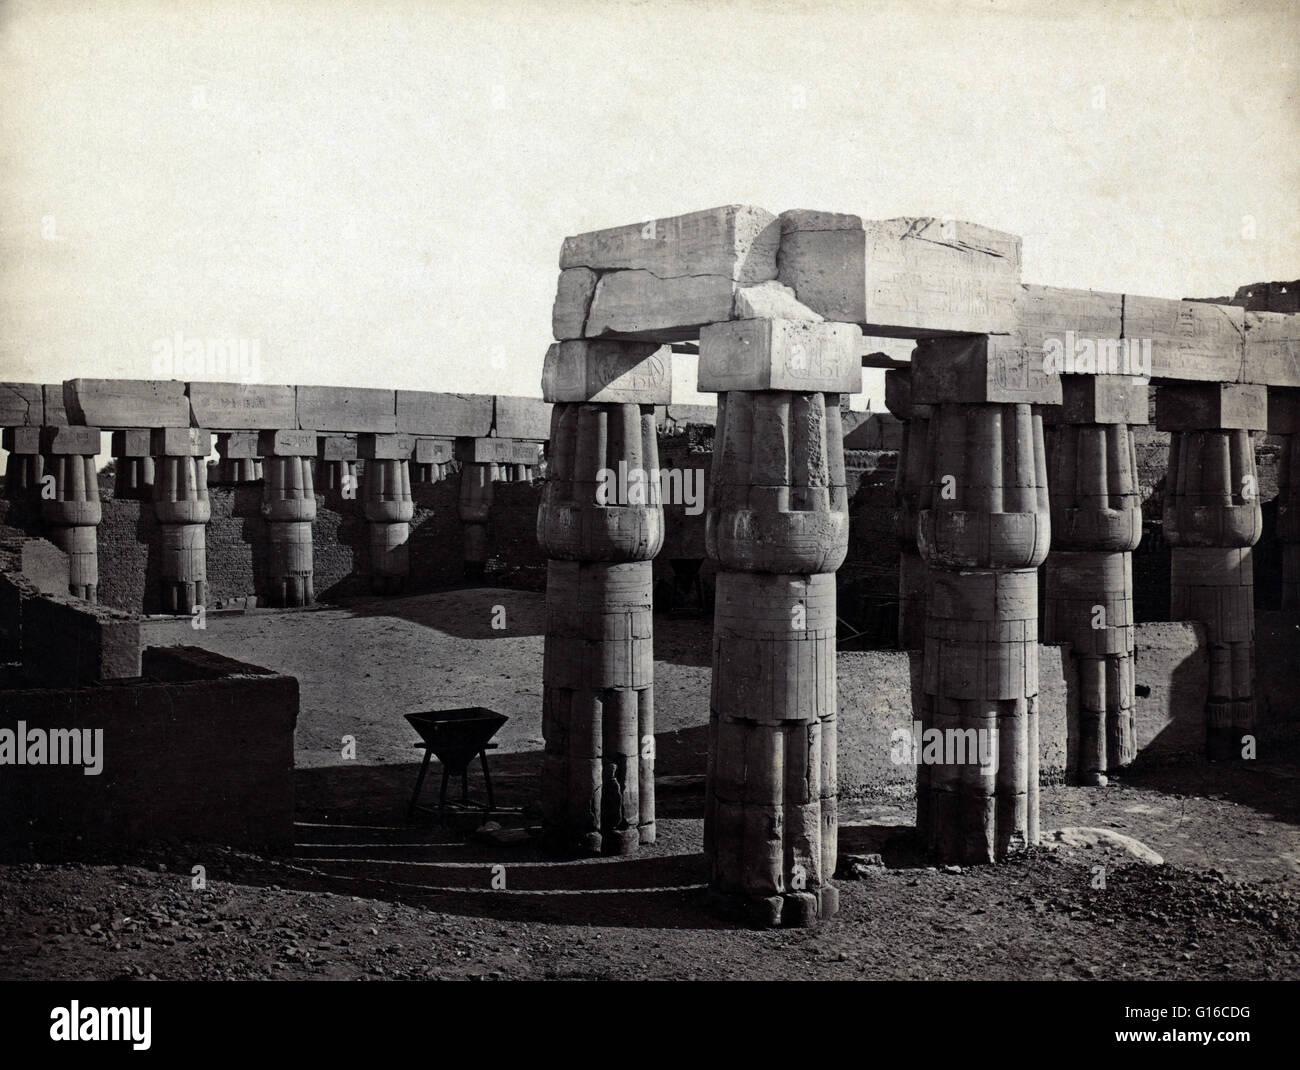 Court of Temple, photographed by Francis Frith, circa 1856-1860. Luxor Temple is a large Ancient Egyptian temple complex located on the east bank of the Nile River in the city today known as Luxor (ancient Thebes) and was founded in 1400 BC. In Luxor ther Stock Photo